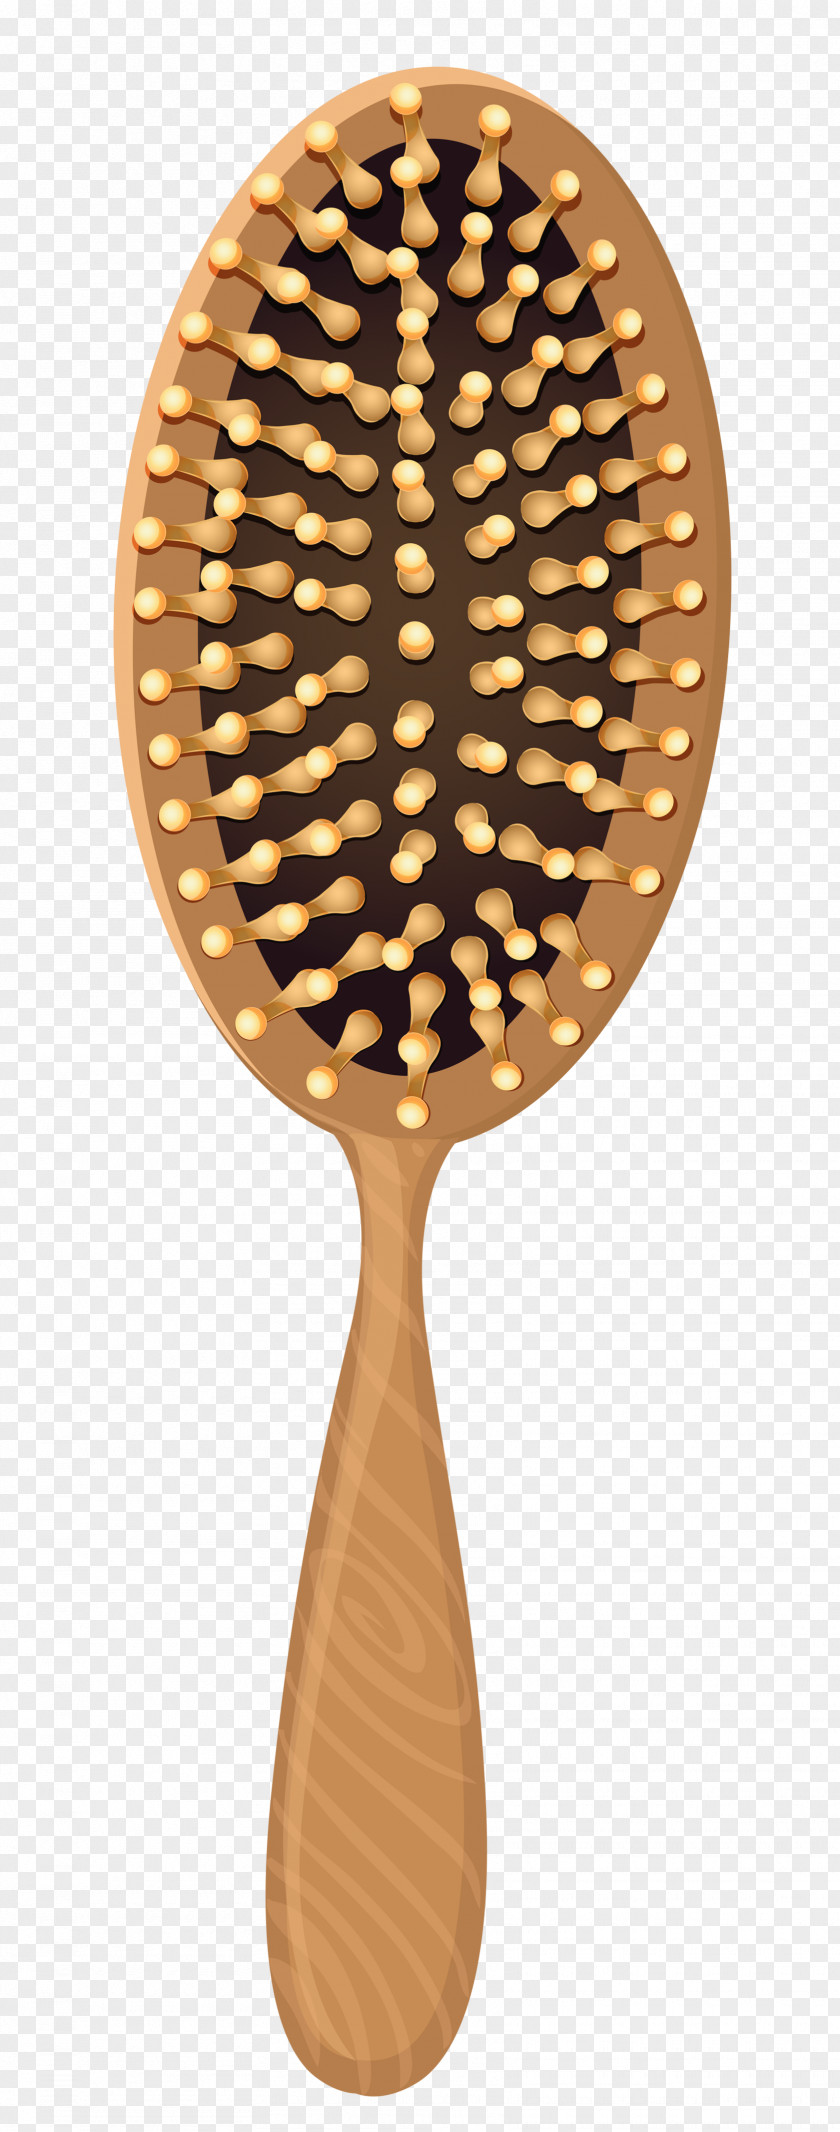 Wooden Hairbrush Clipart Image Comb Clip Art PNG